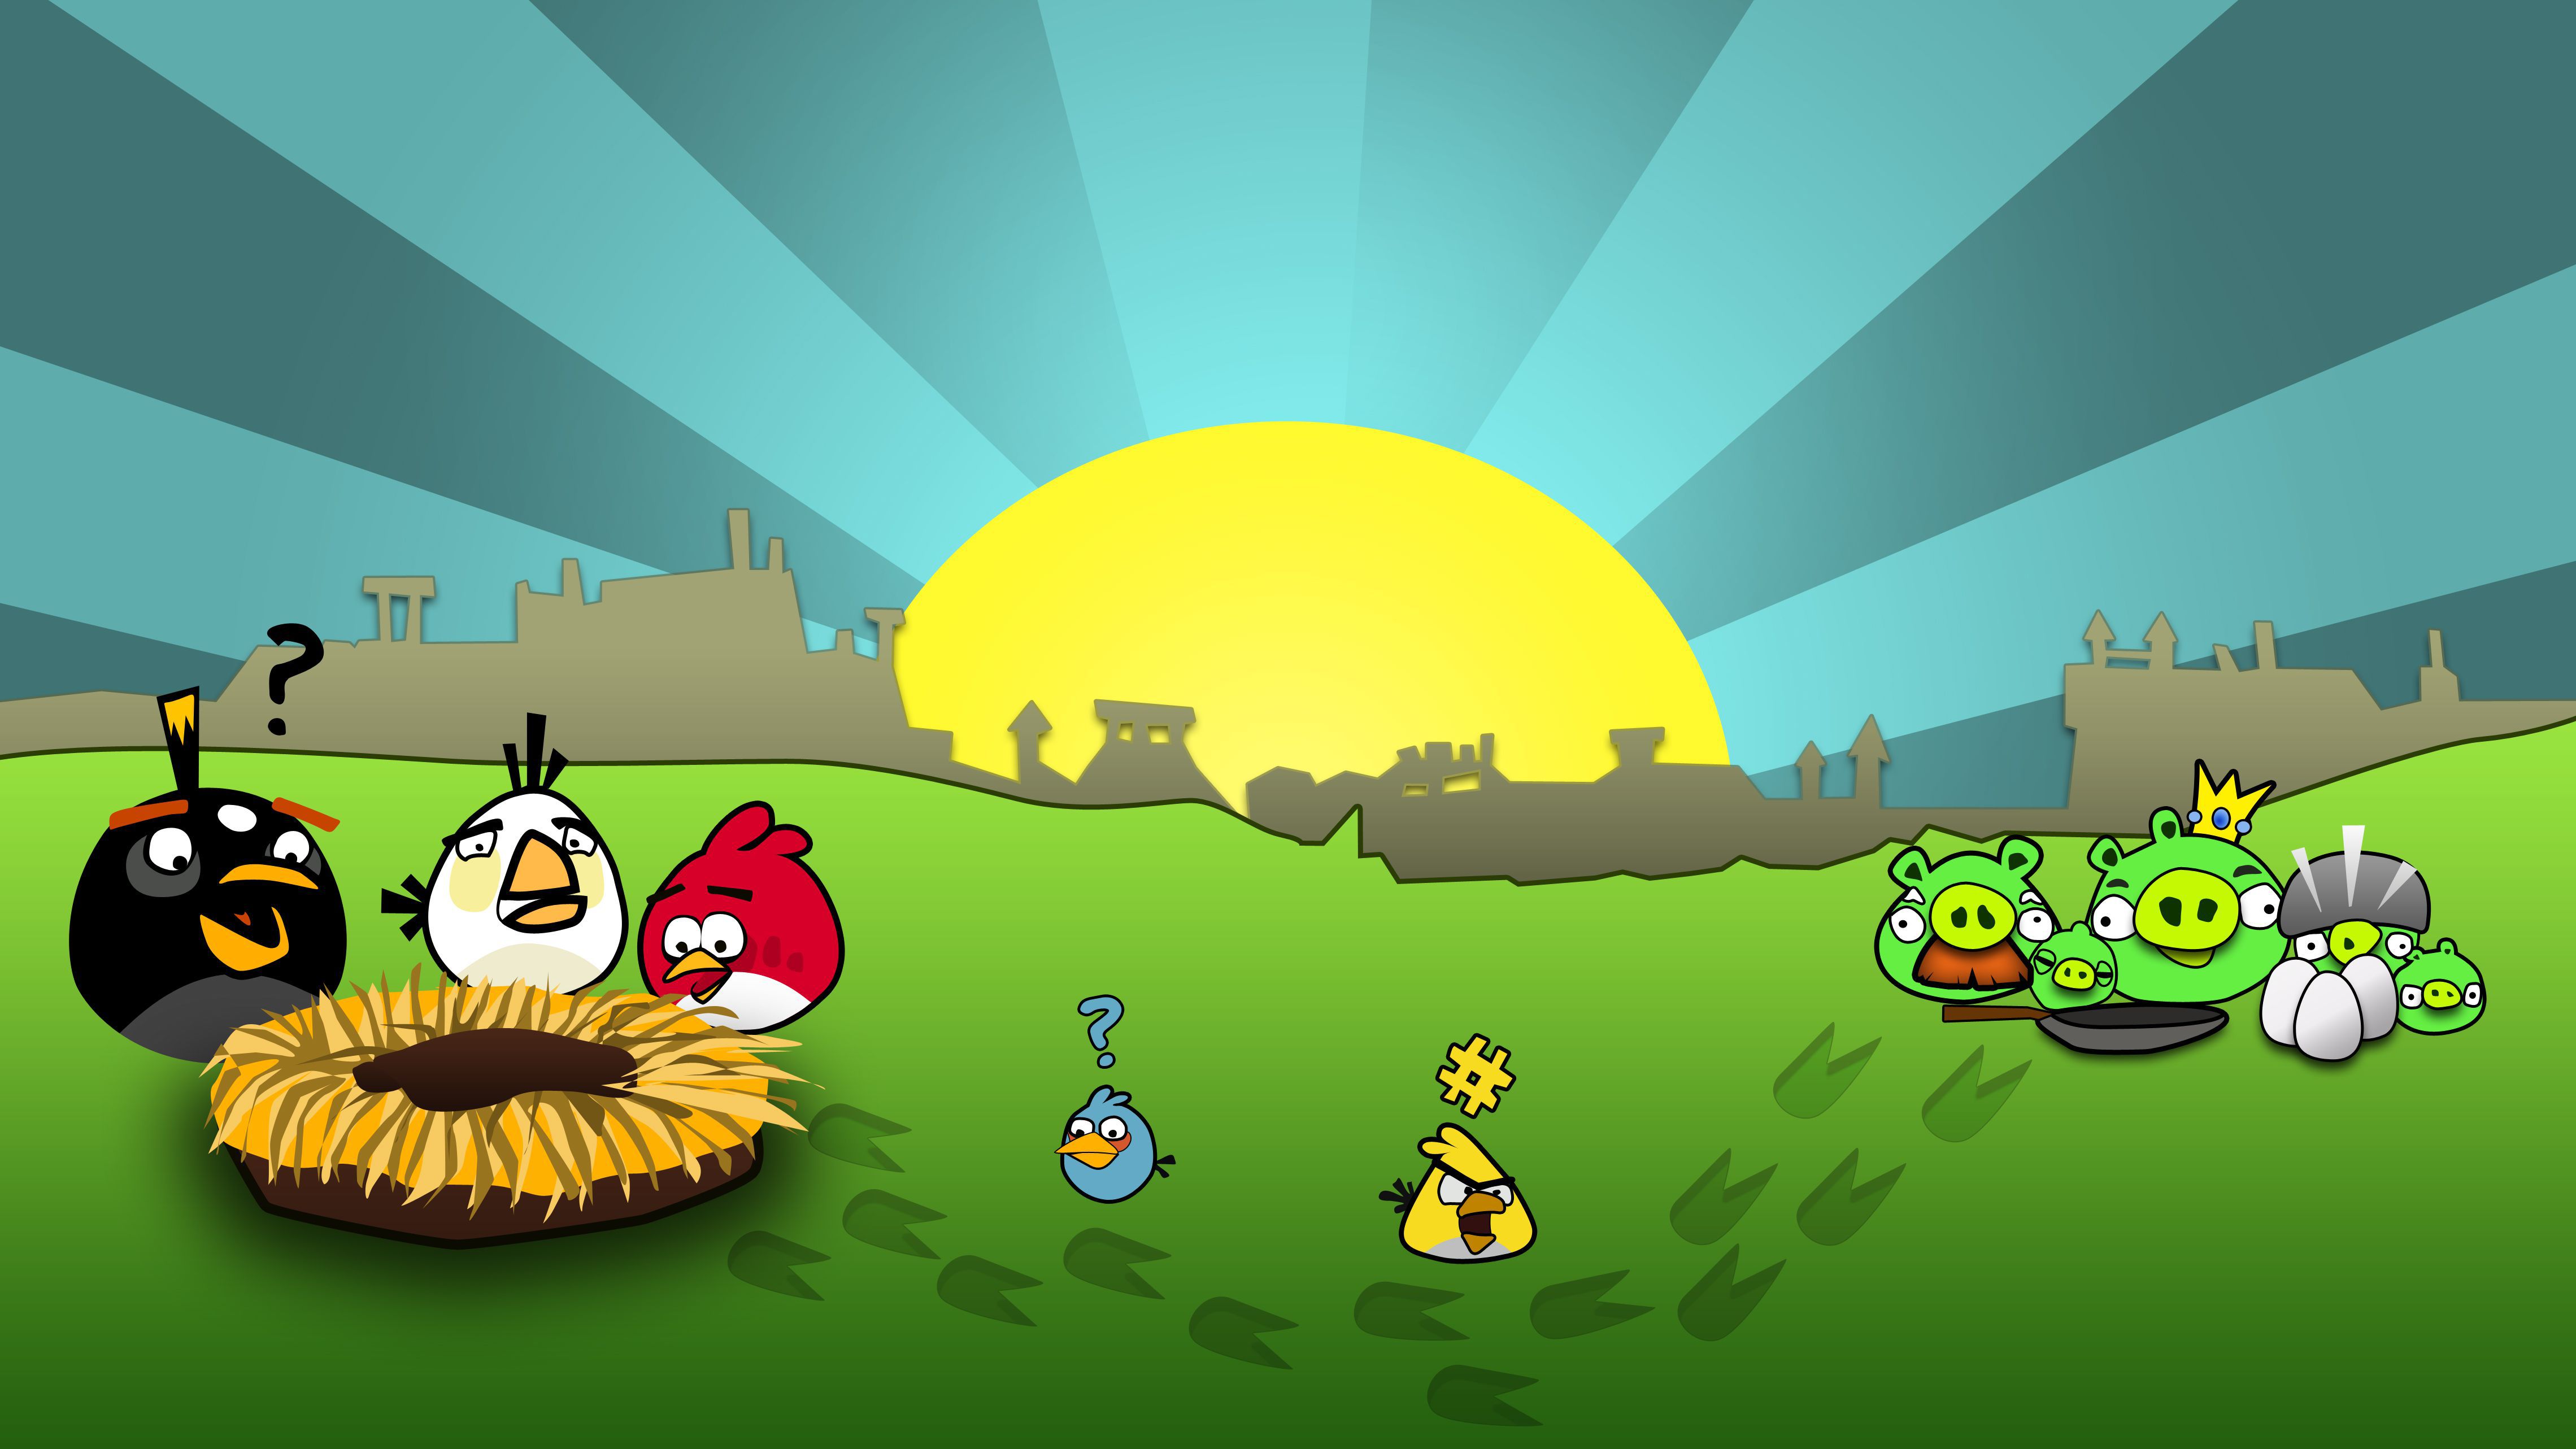 download angry birds for pc free full version